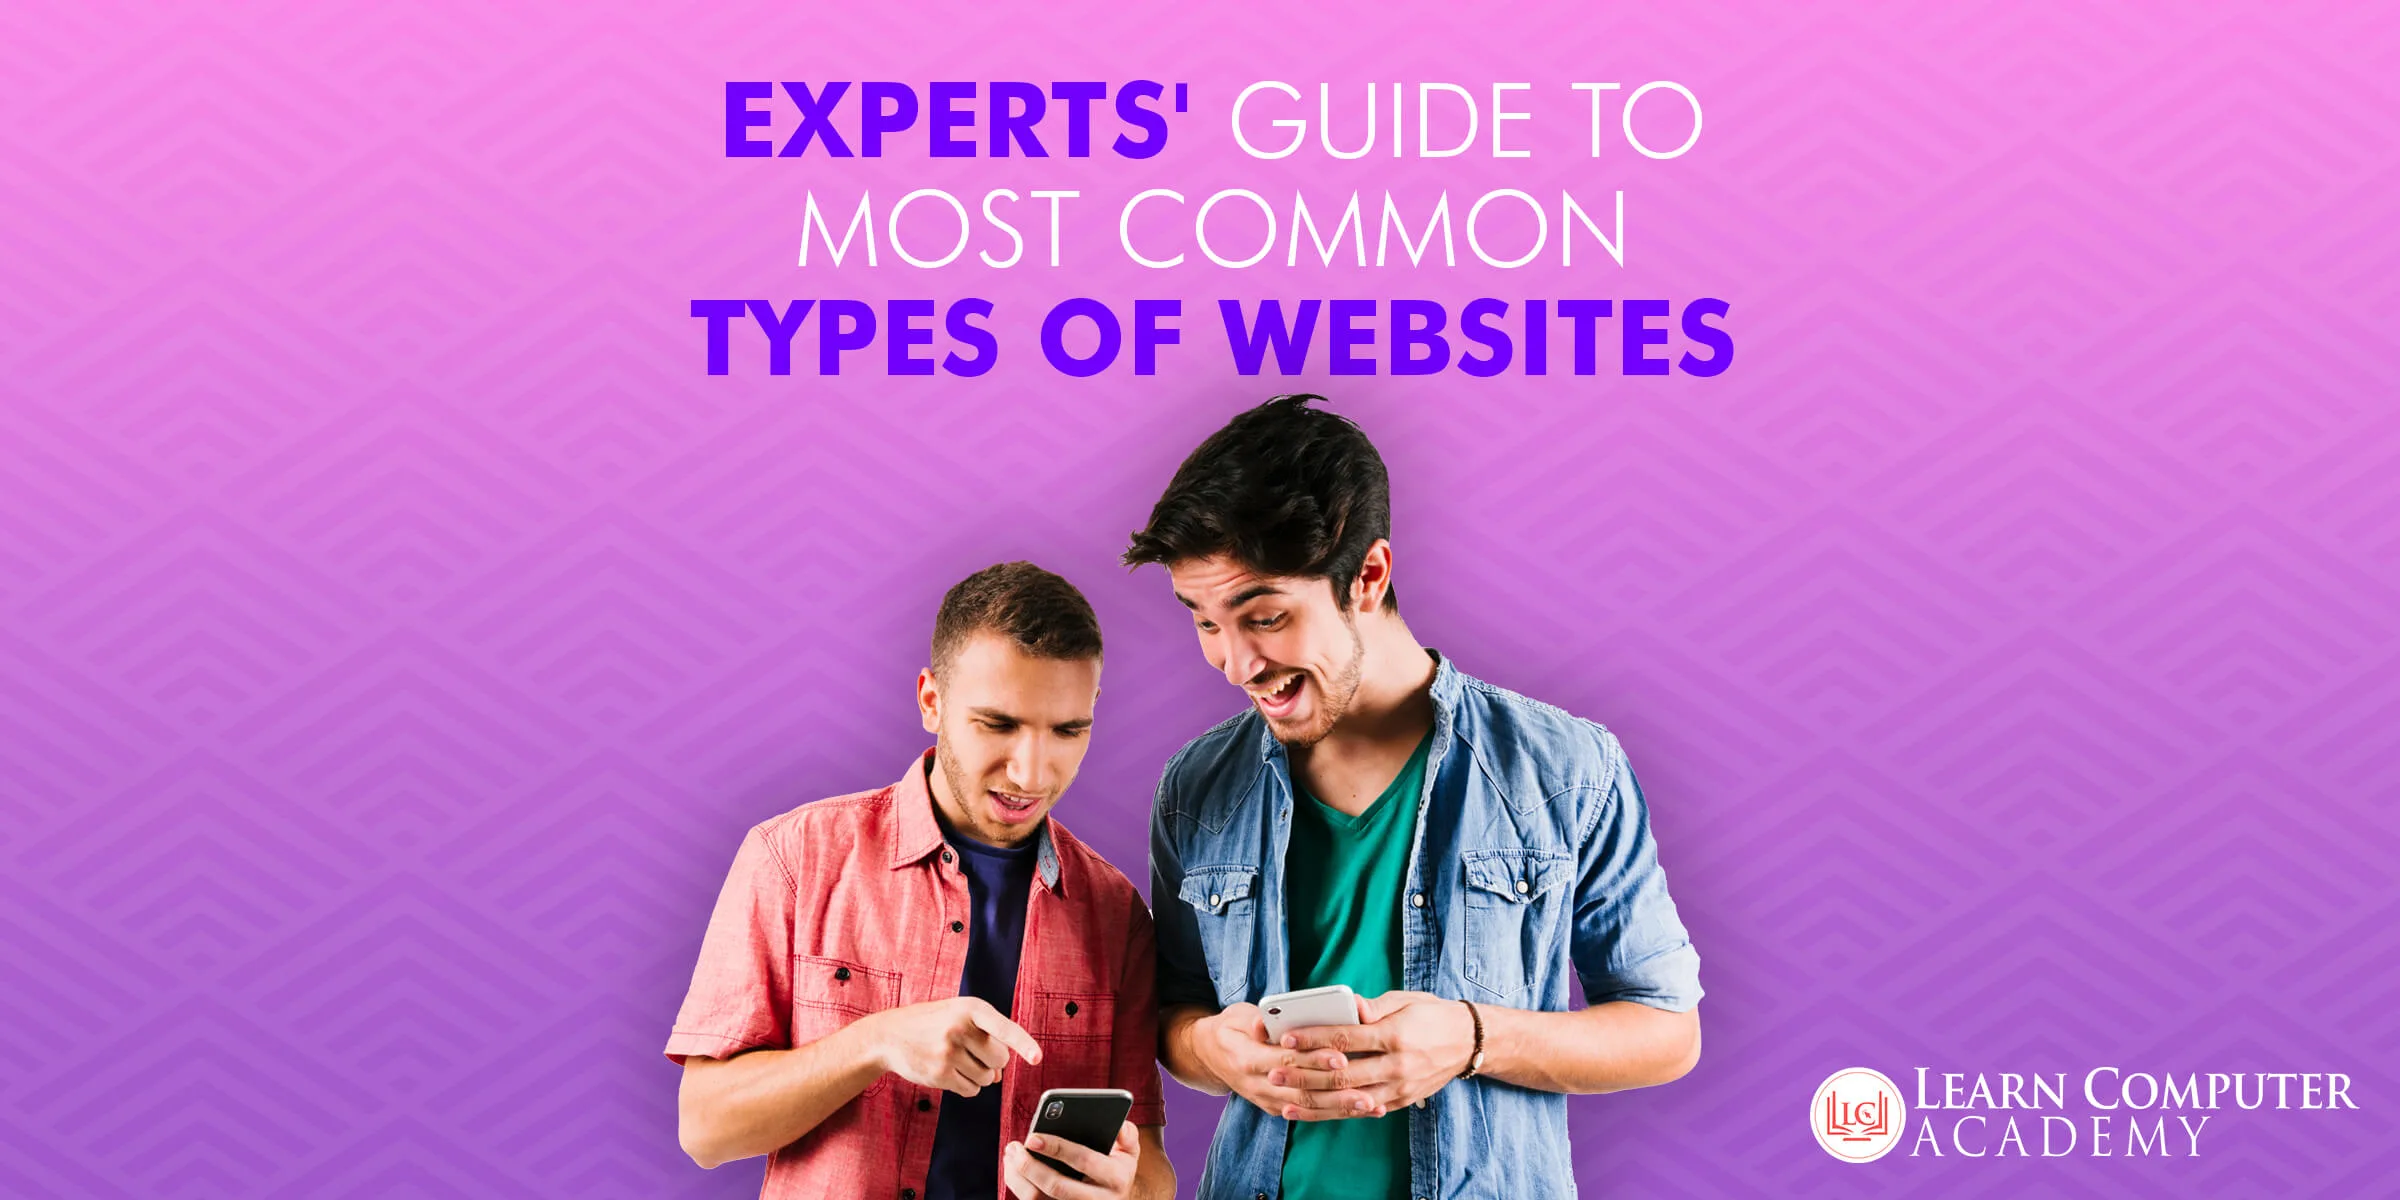 Experts' guide to most common types of websites